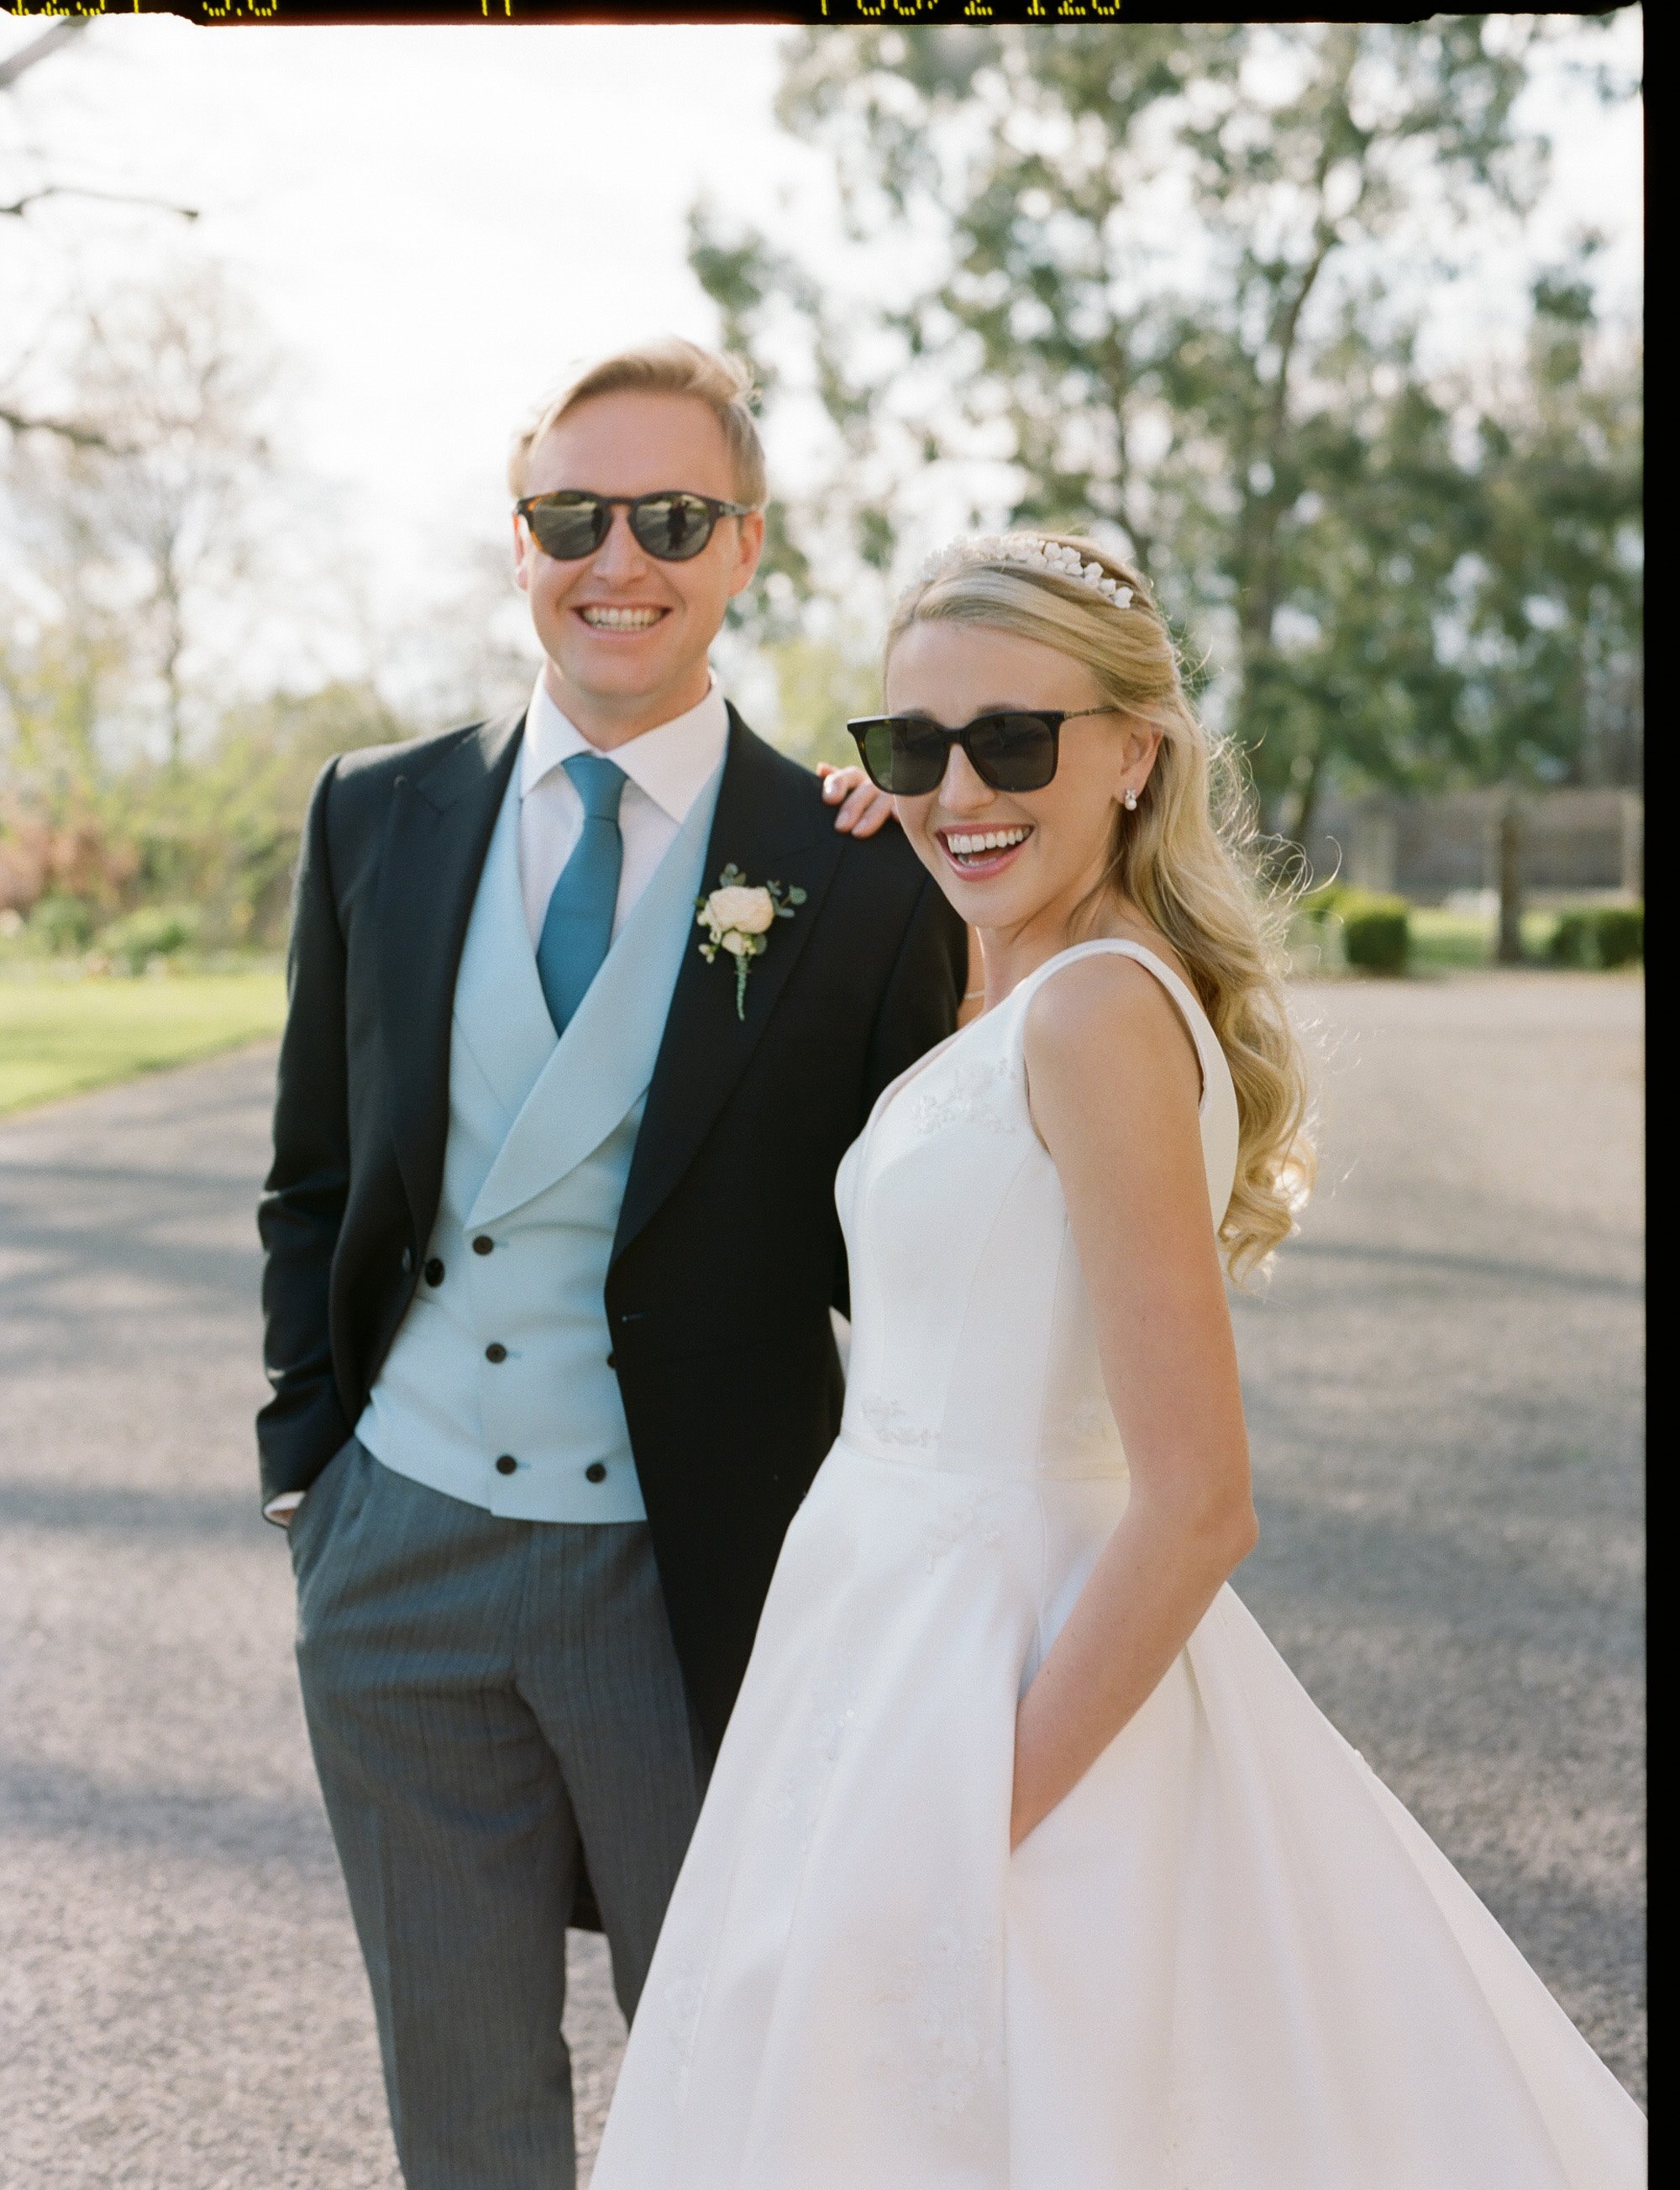 Cool bride wearing simple satin wedding dress with pockets, pearl tiara and pearl earrings and groom stand together in matching sunglasses 